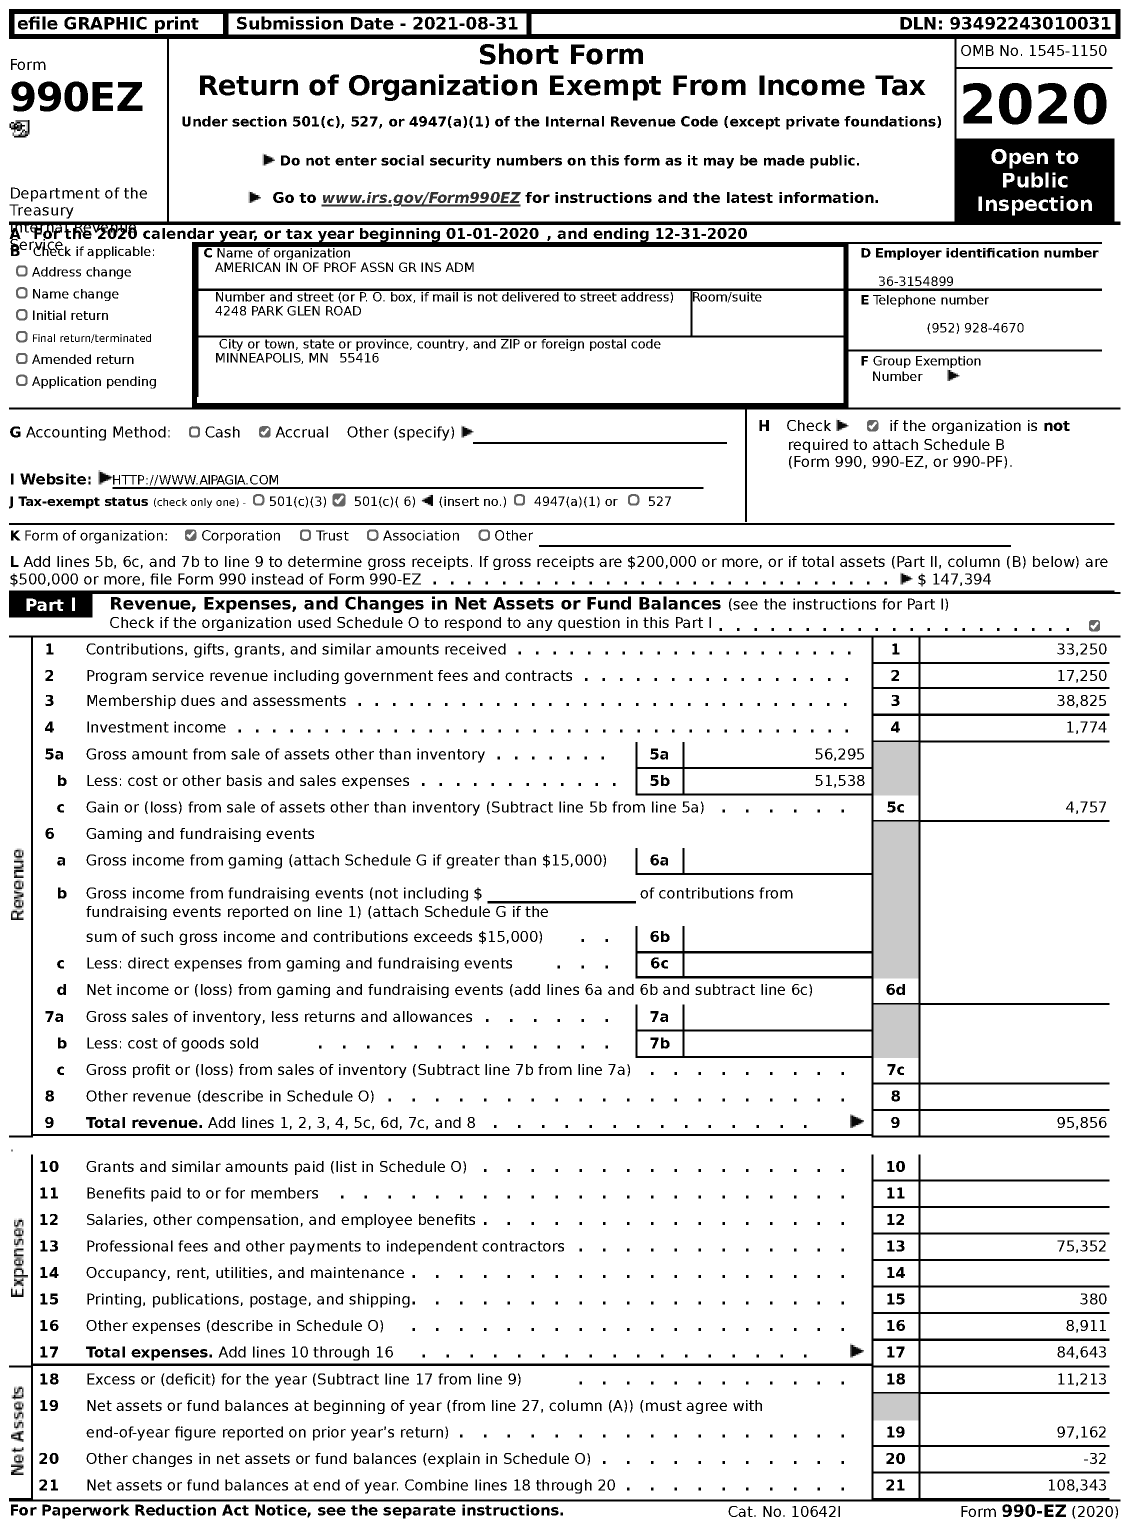 Image of first page of 2020 Form 990EZ for American in of Prof Association GR Ins Adm